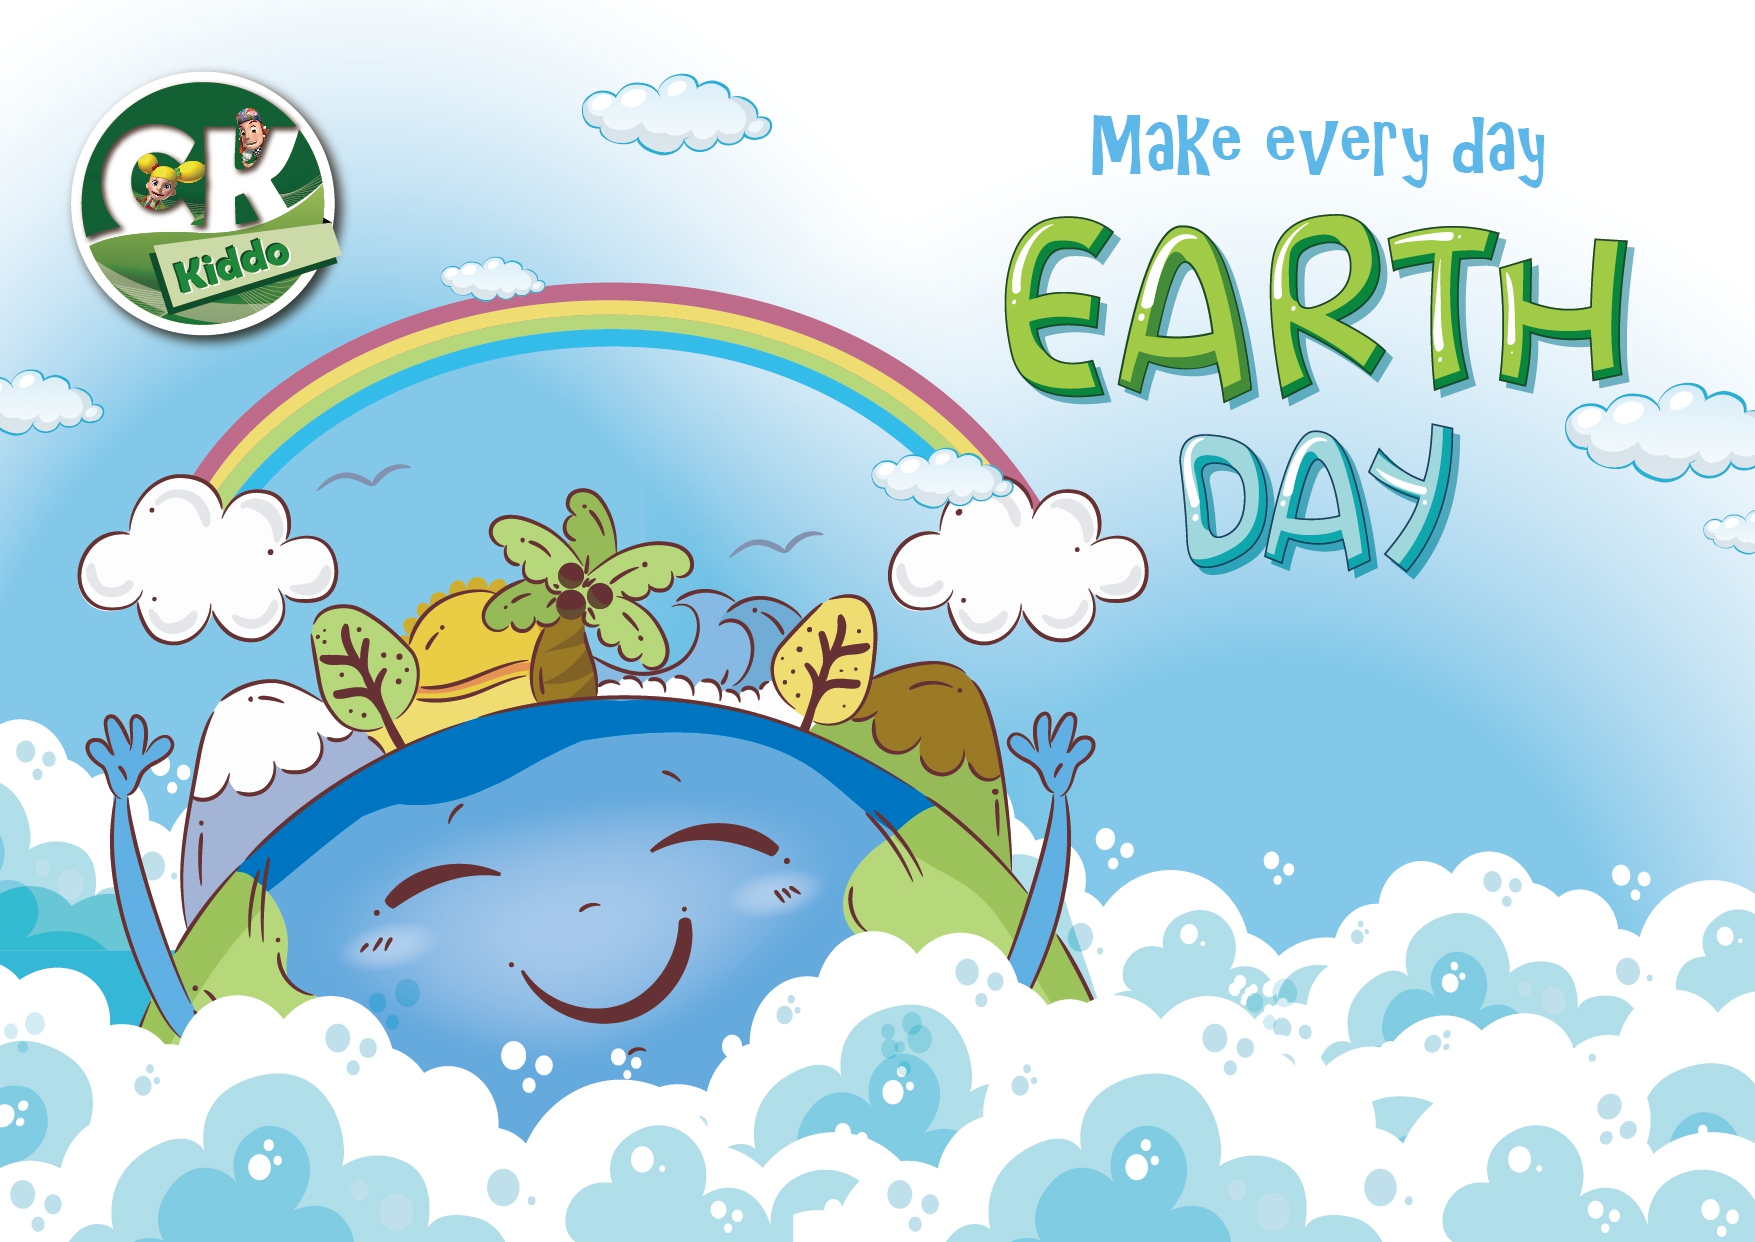 Happy Earth Day! #Invest in our planet